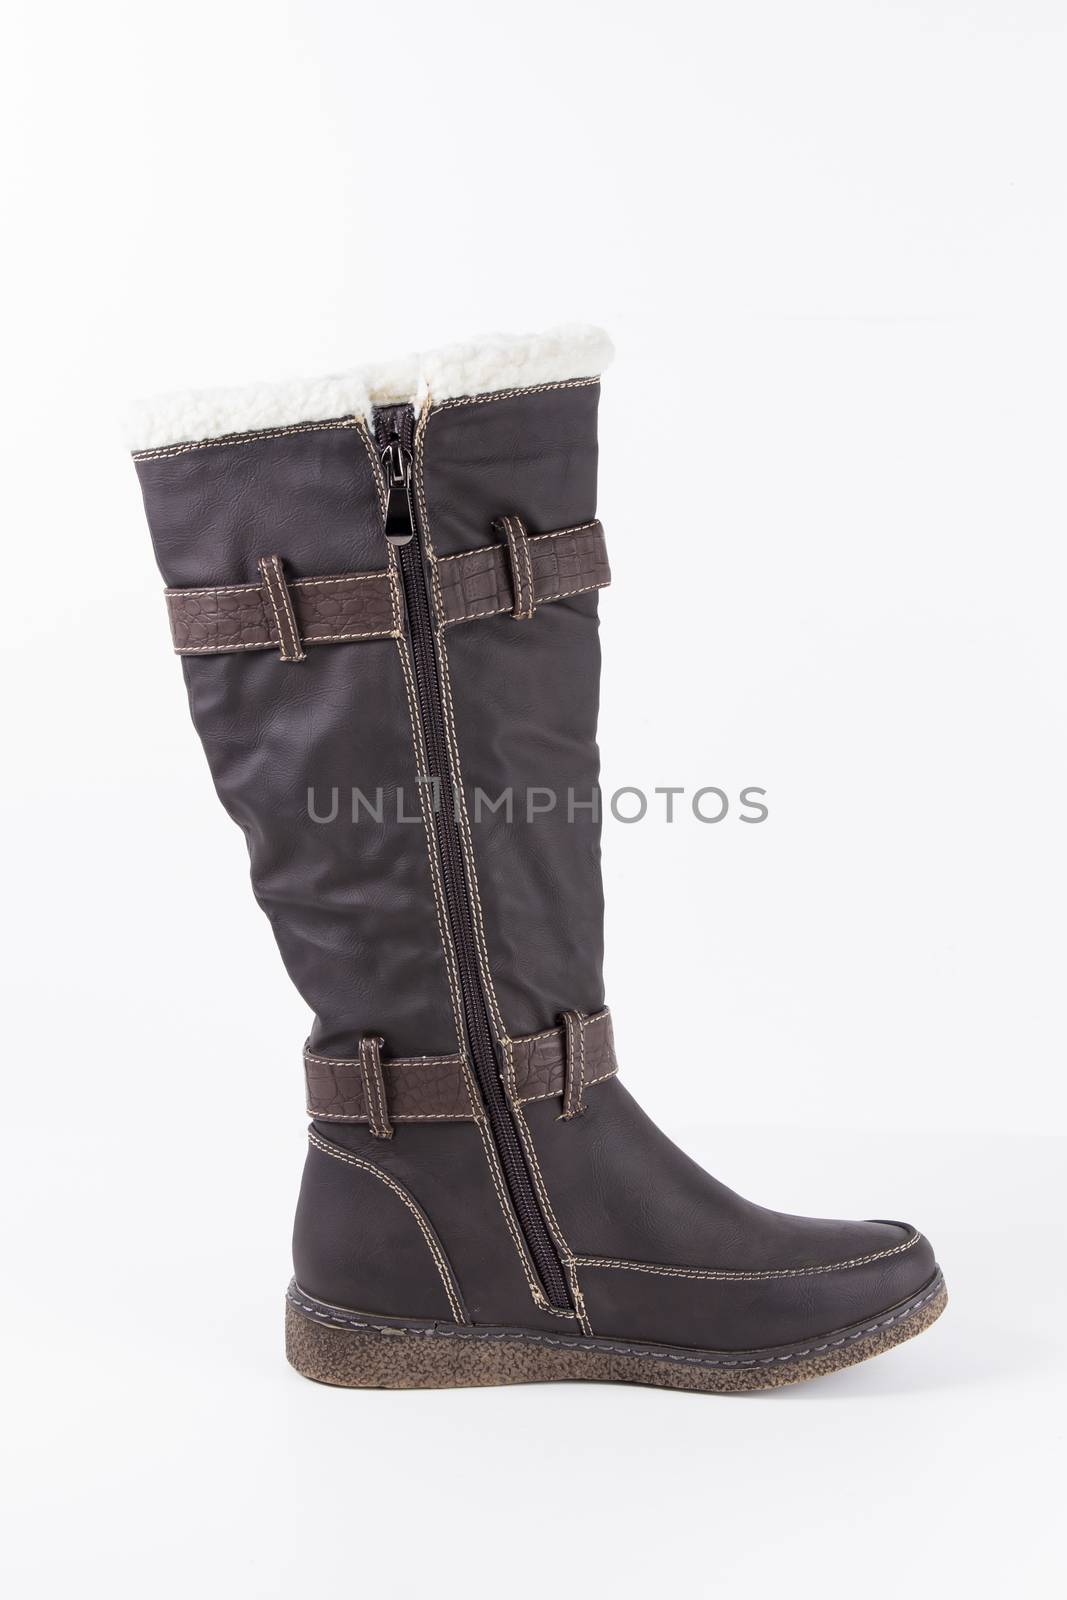 Brown leather boots on white background, isolated product. by GeorgeVieiraSilva